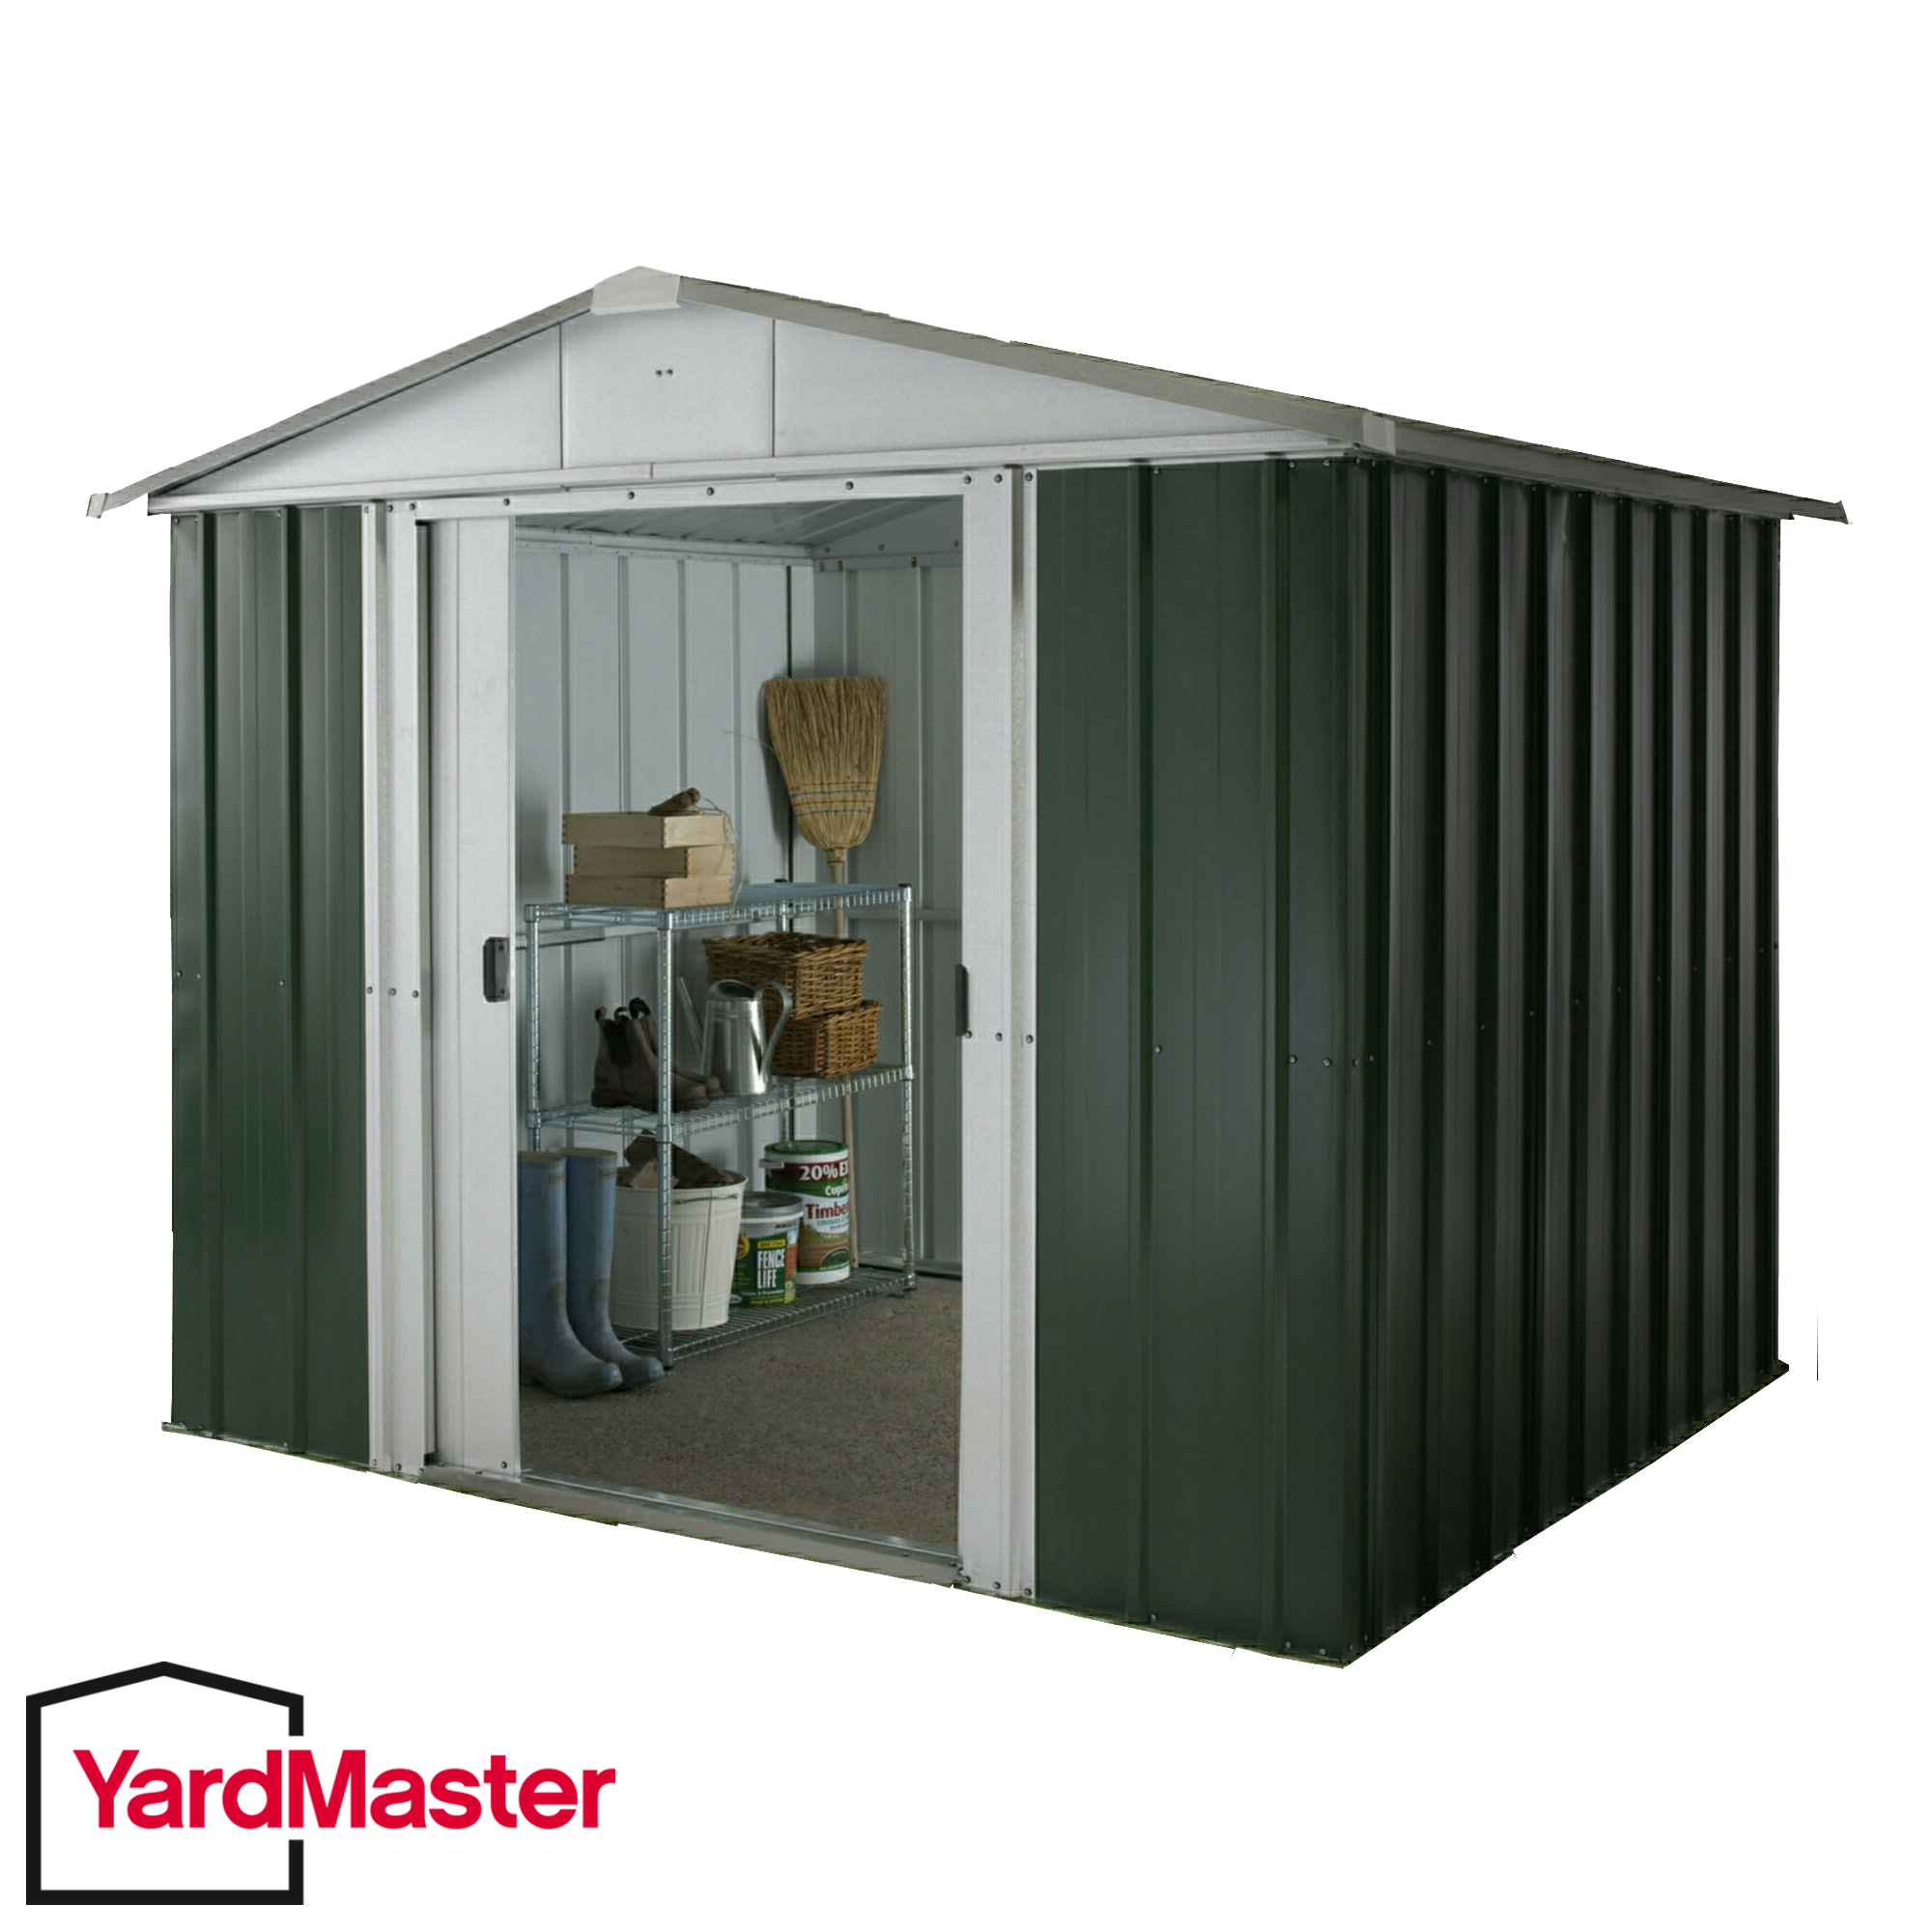 Featured image for “YardMaster 8x7 Emerald Deluxe Apex (GEYZ) Metal Shed”